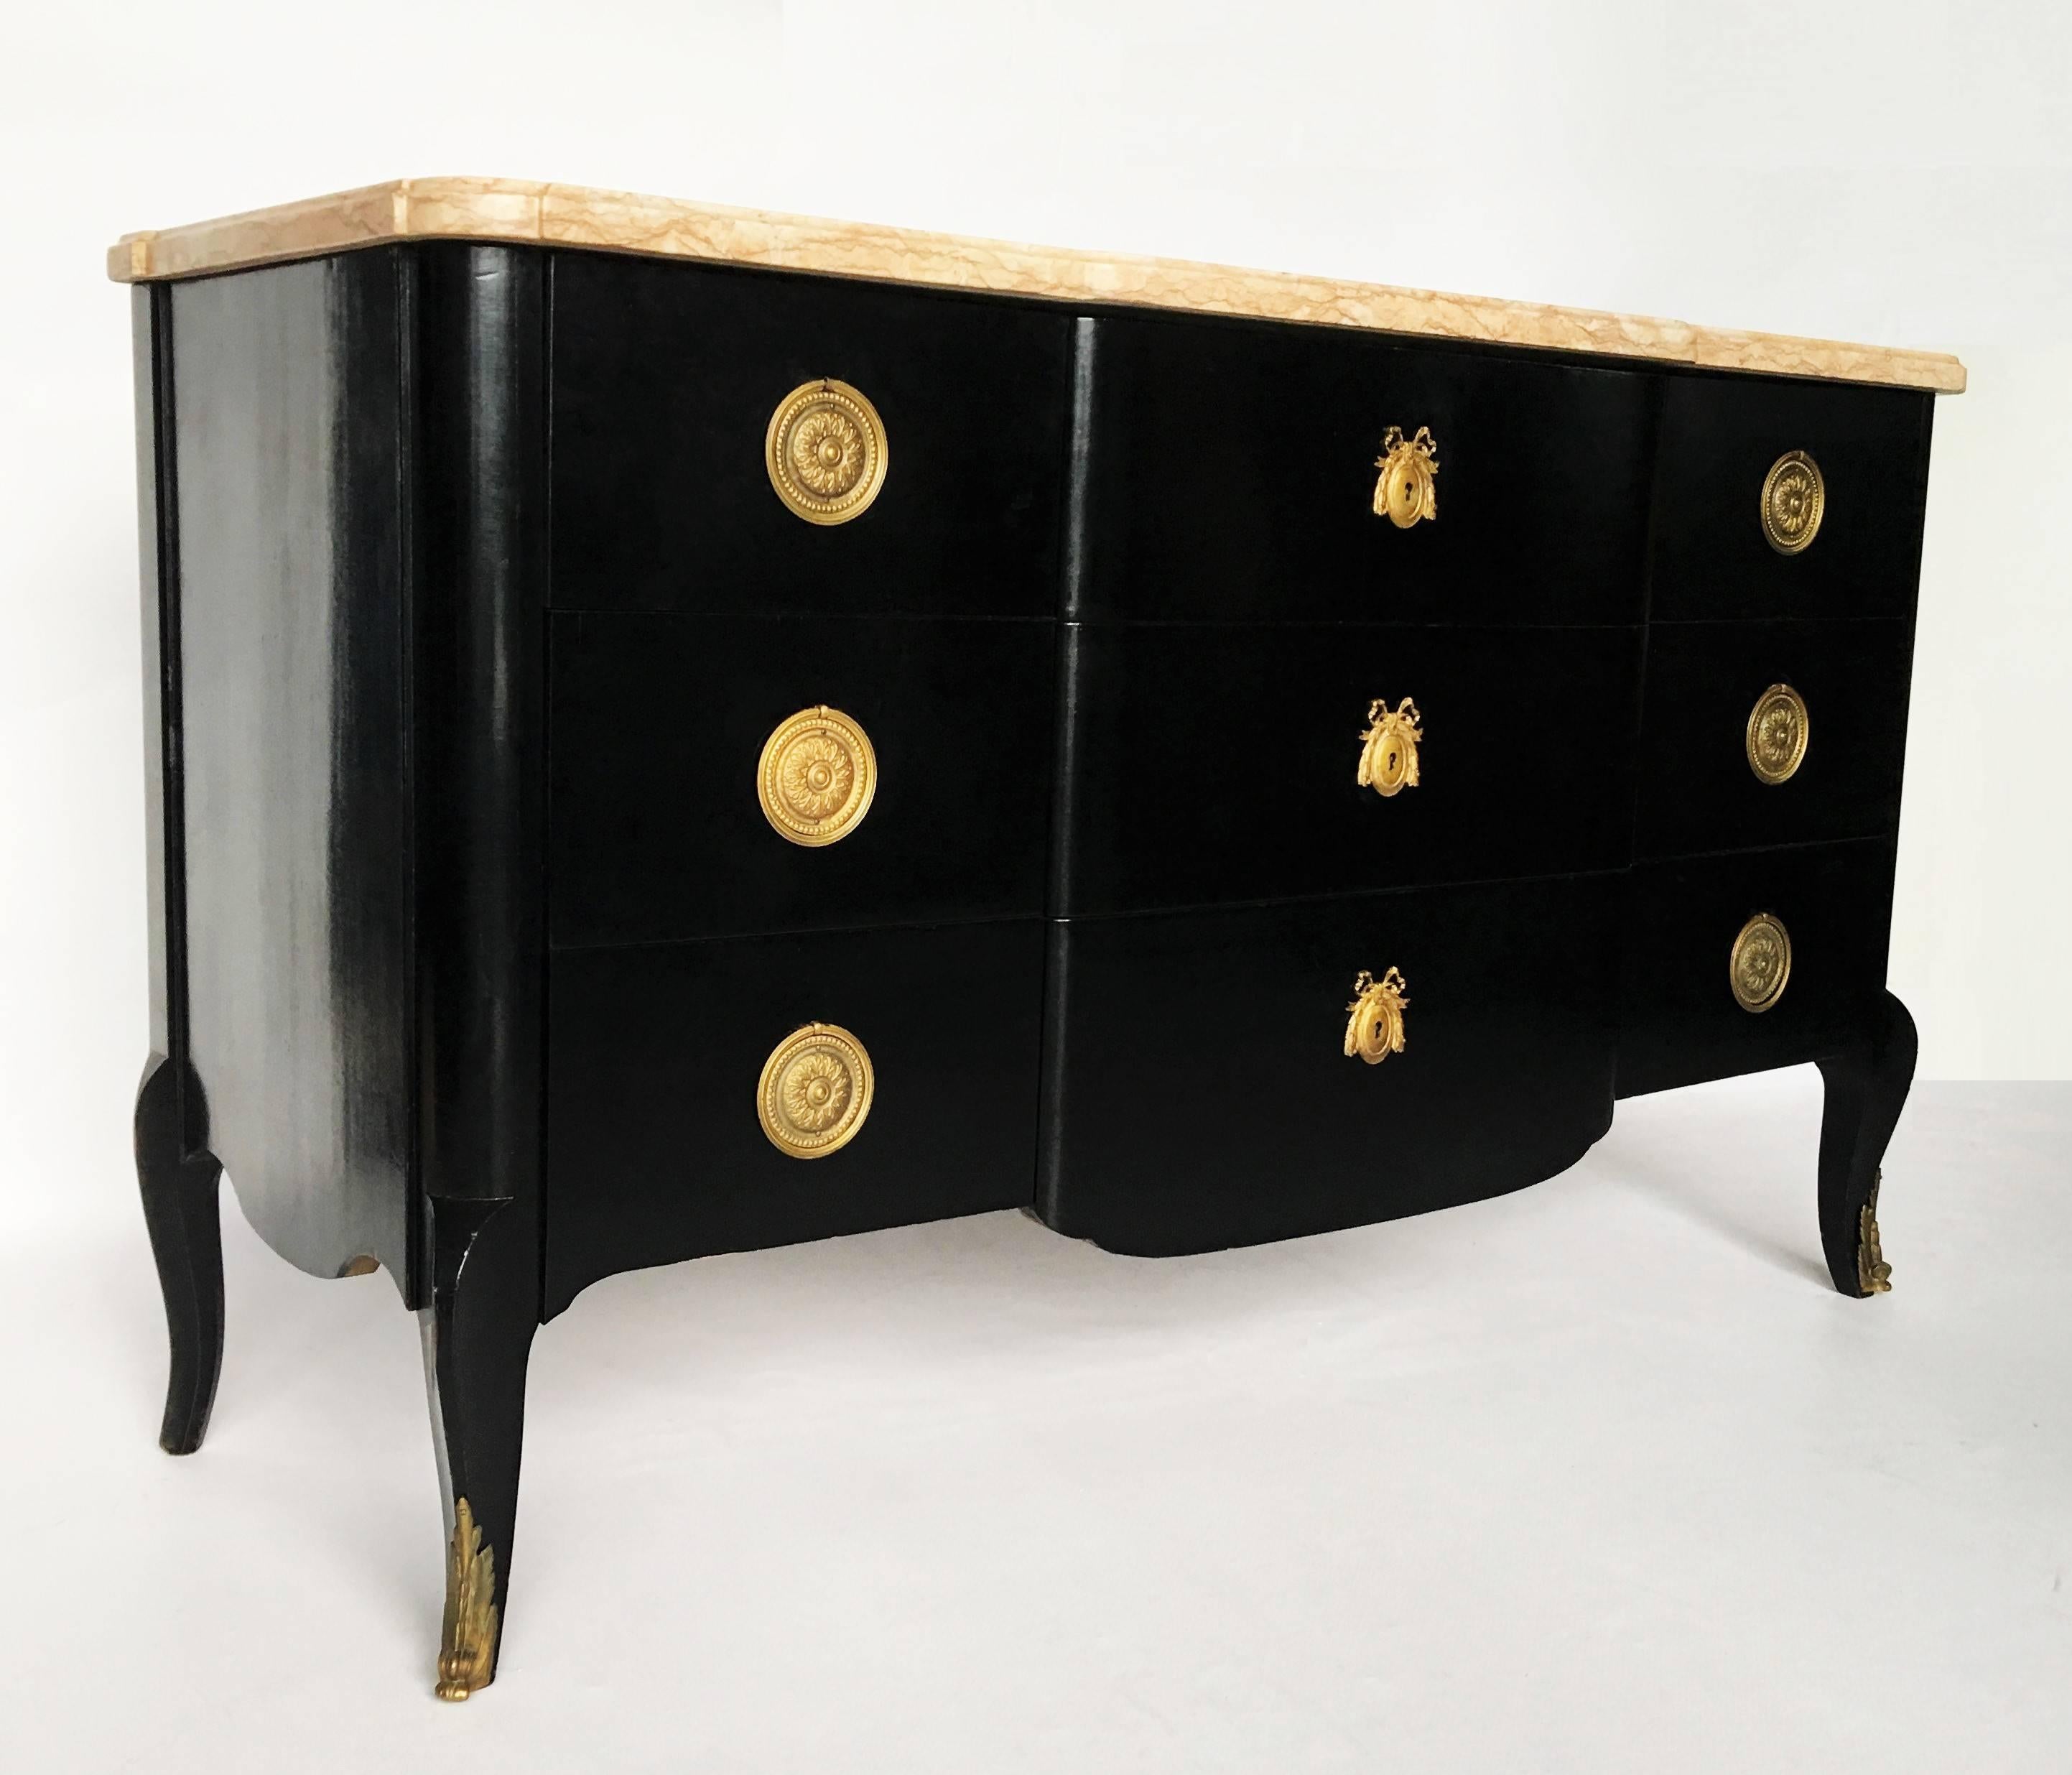 Antique French mahogany marble-top Louis XVI style commode has been ebonized and finished with a museum quality. This lovely piece features pink and grey veined marble-top. The chest has three large drawers in the middle and six small drawers on